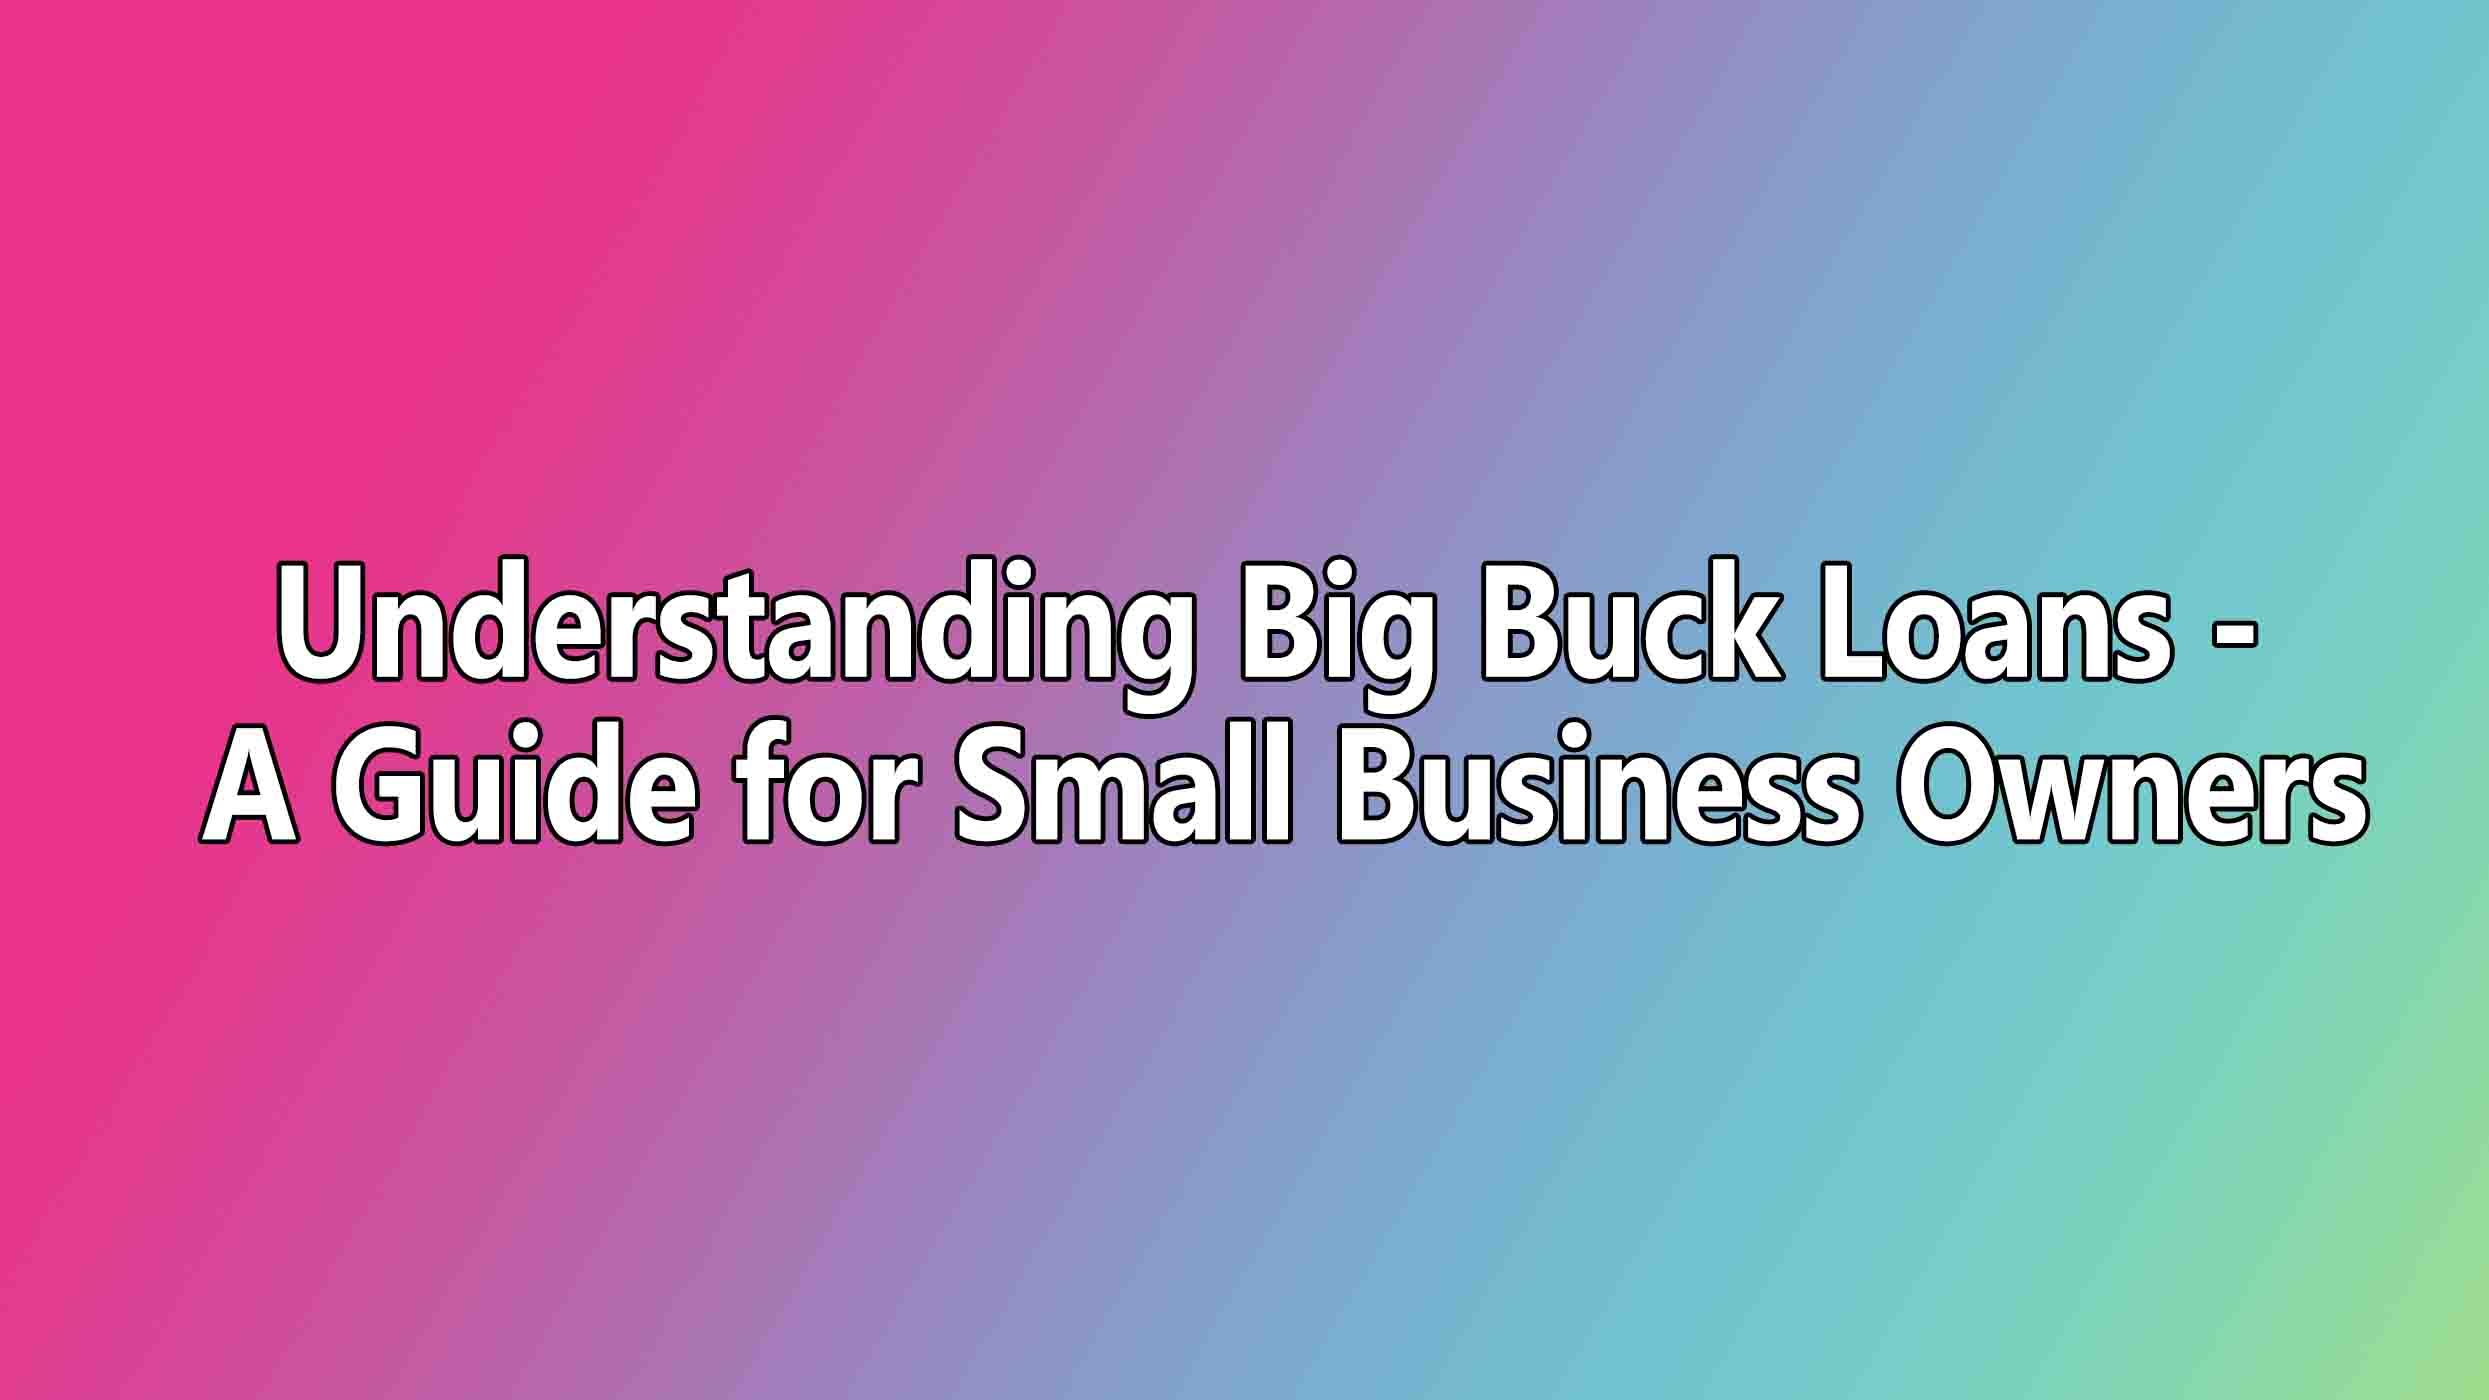 Understanding Big Buck Loans - A Guide for Small Business Owners